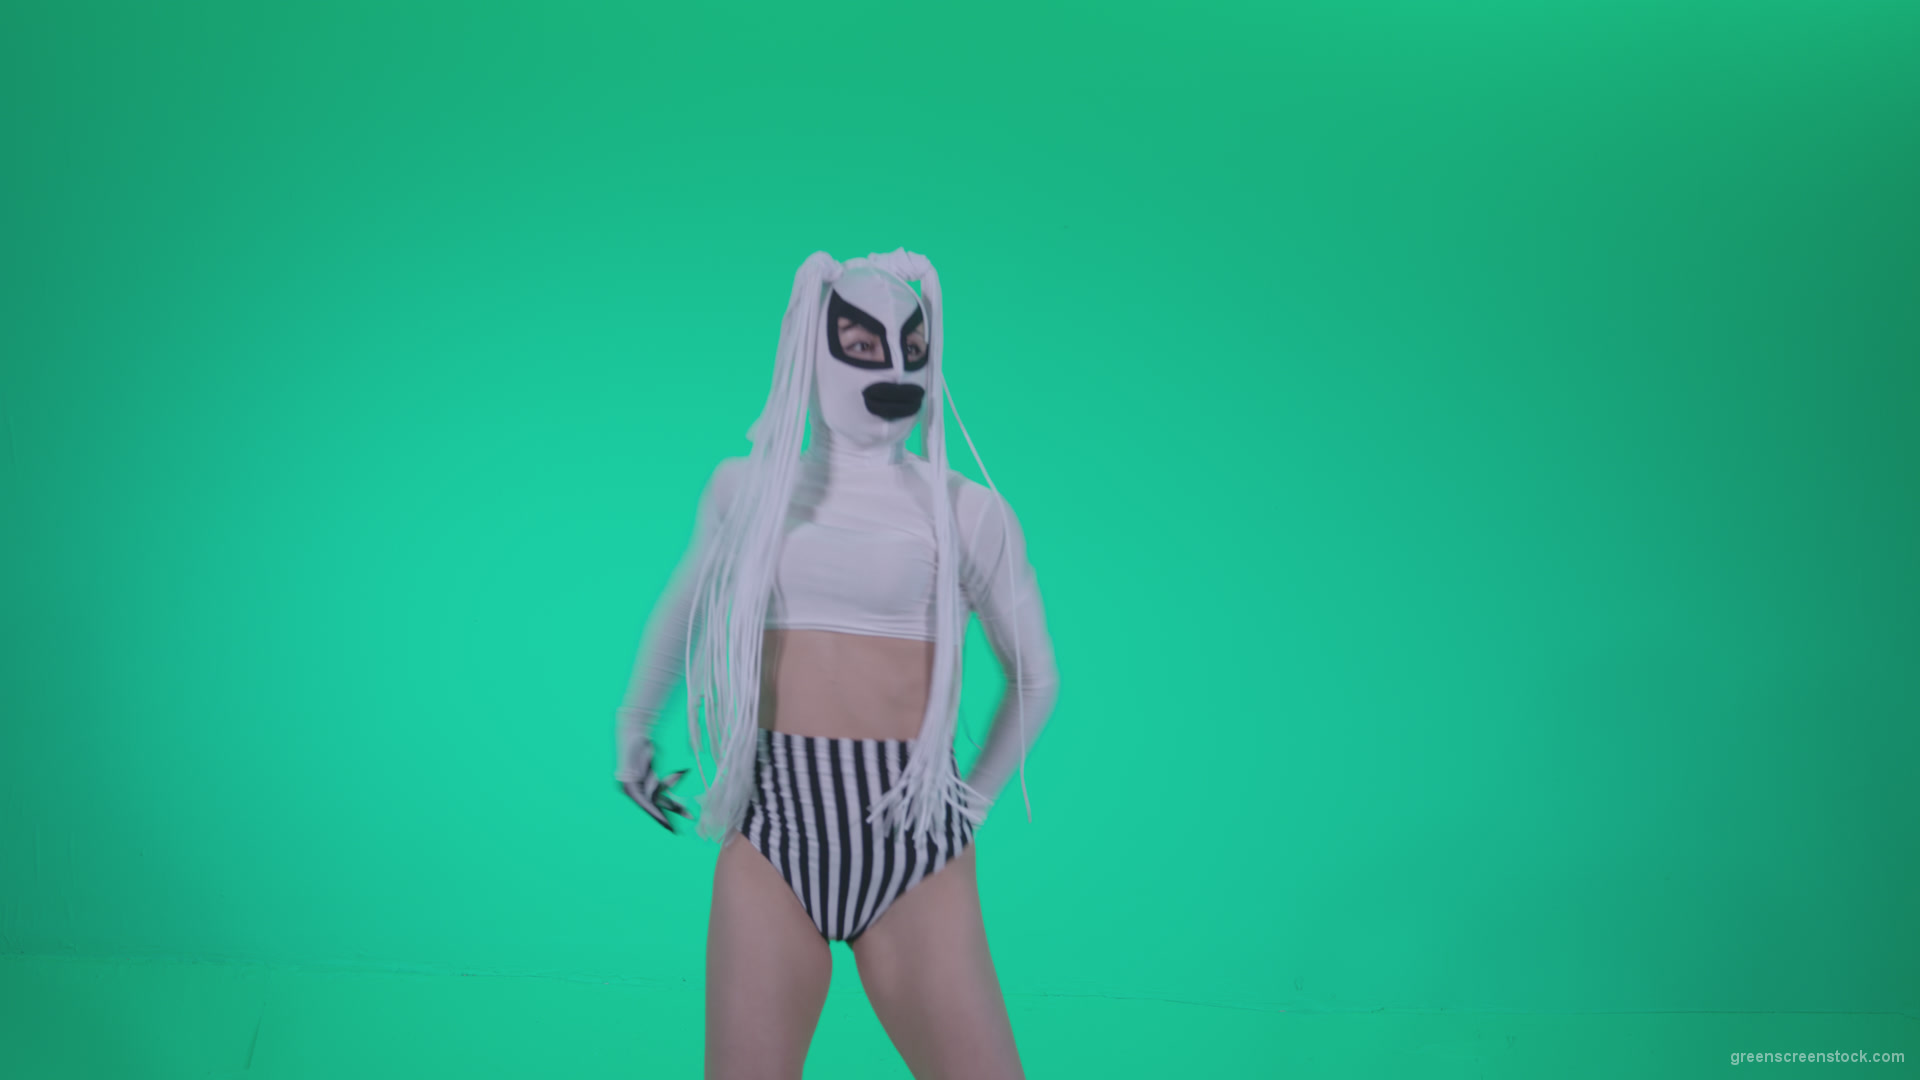 vj video background Go-go-Dancer-with-Latex-Top-t11-Green-Screen-Video-Footage_003